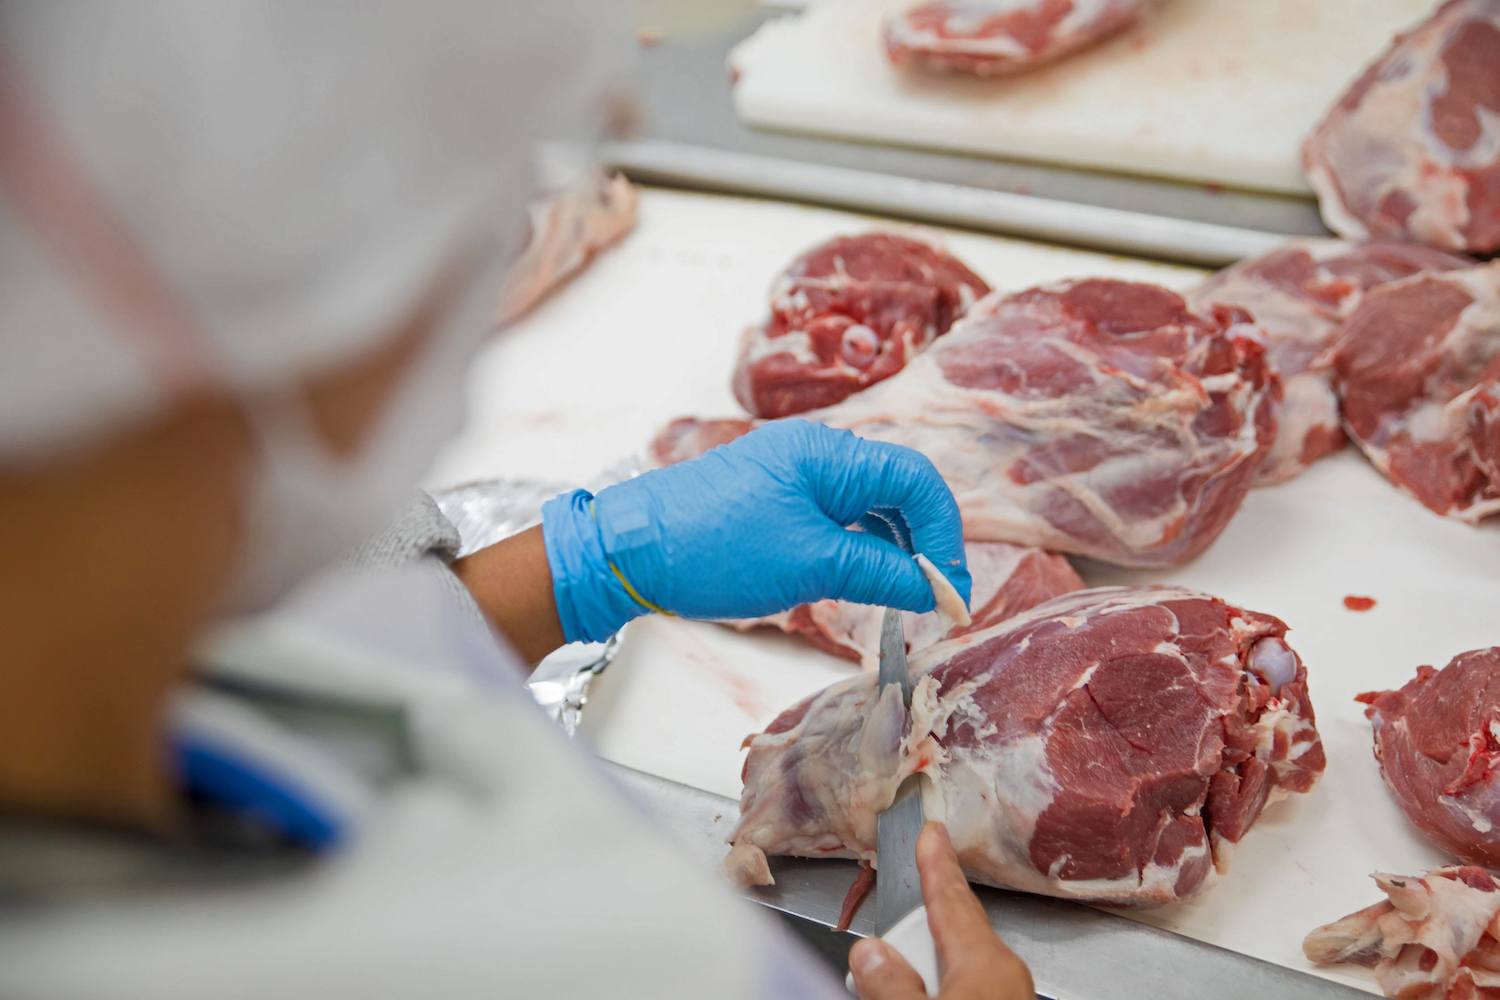 A worker at a meat processing plant, cuts off fat on a cut of meat wearing blue gloves. October 2021